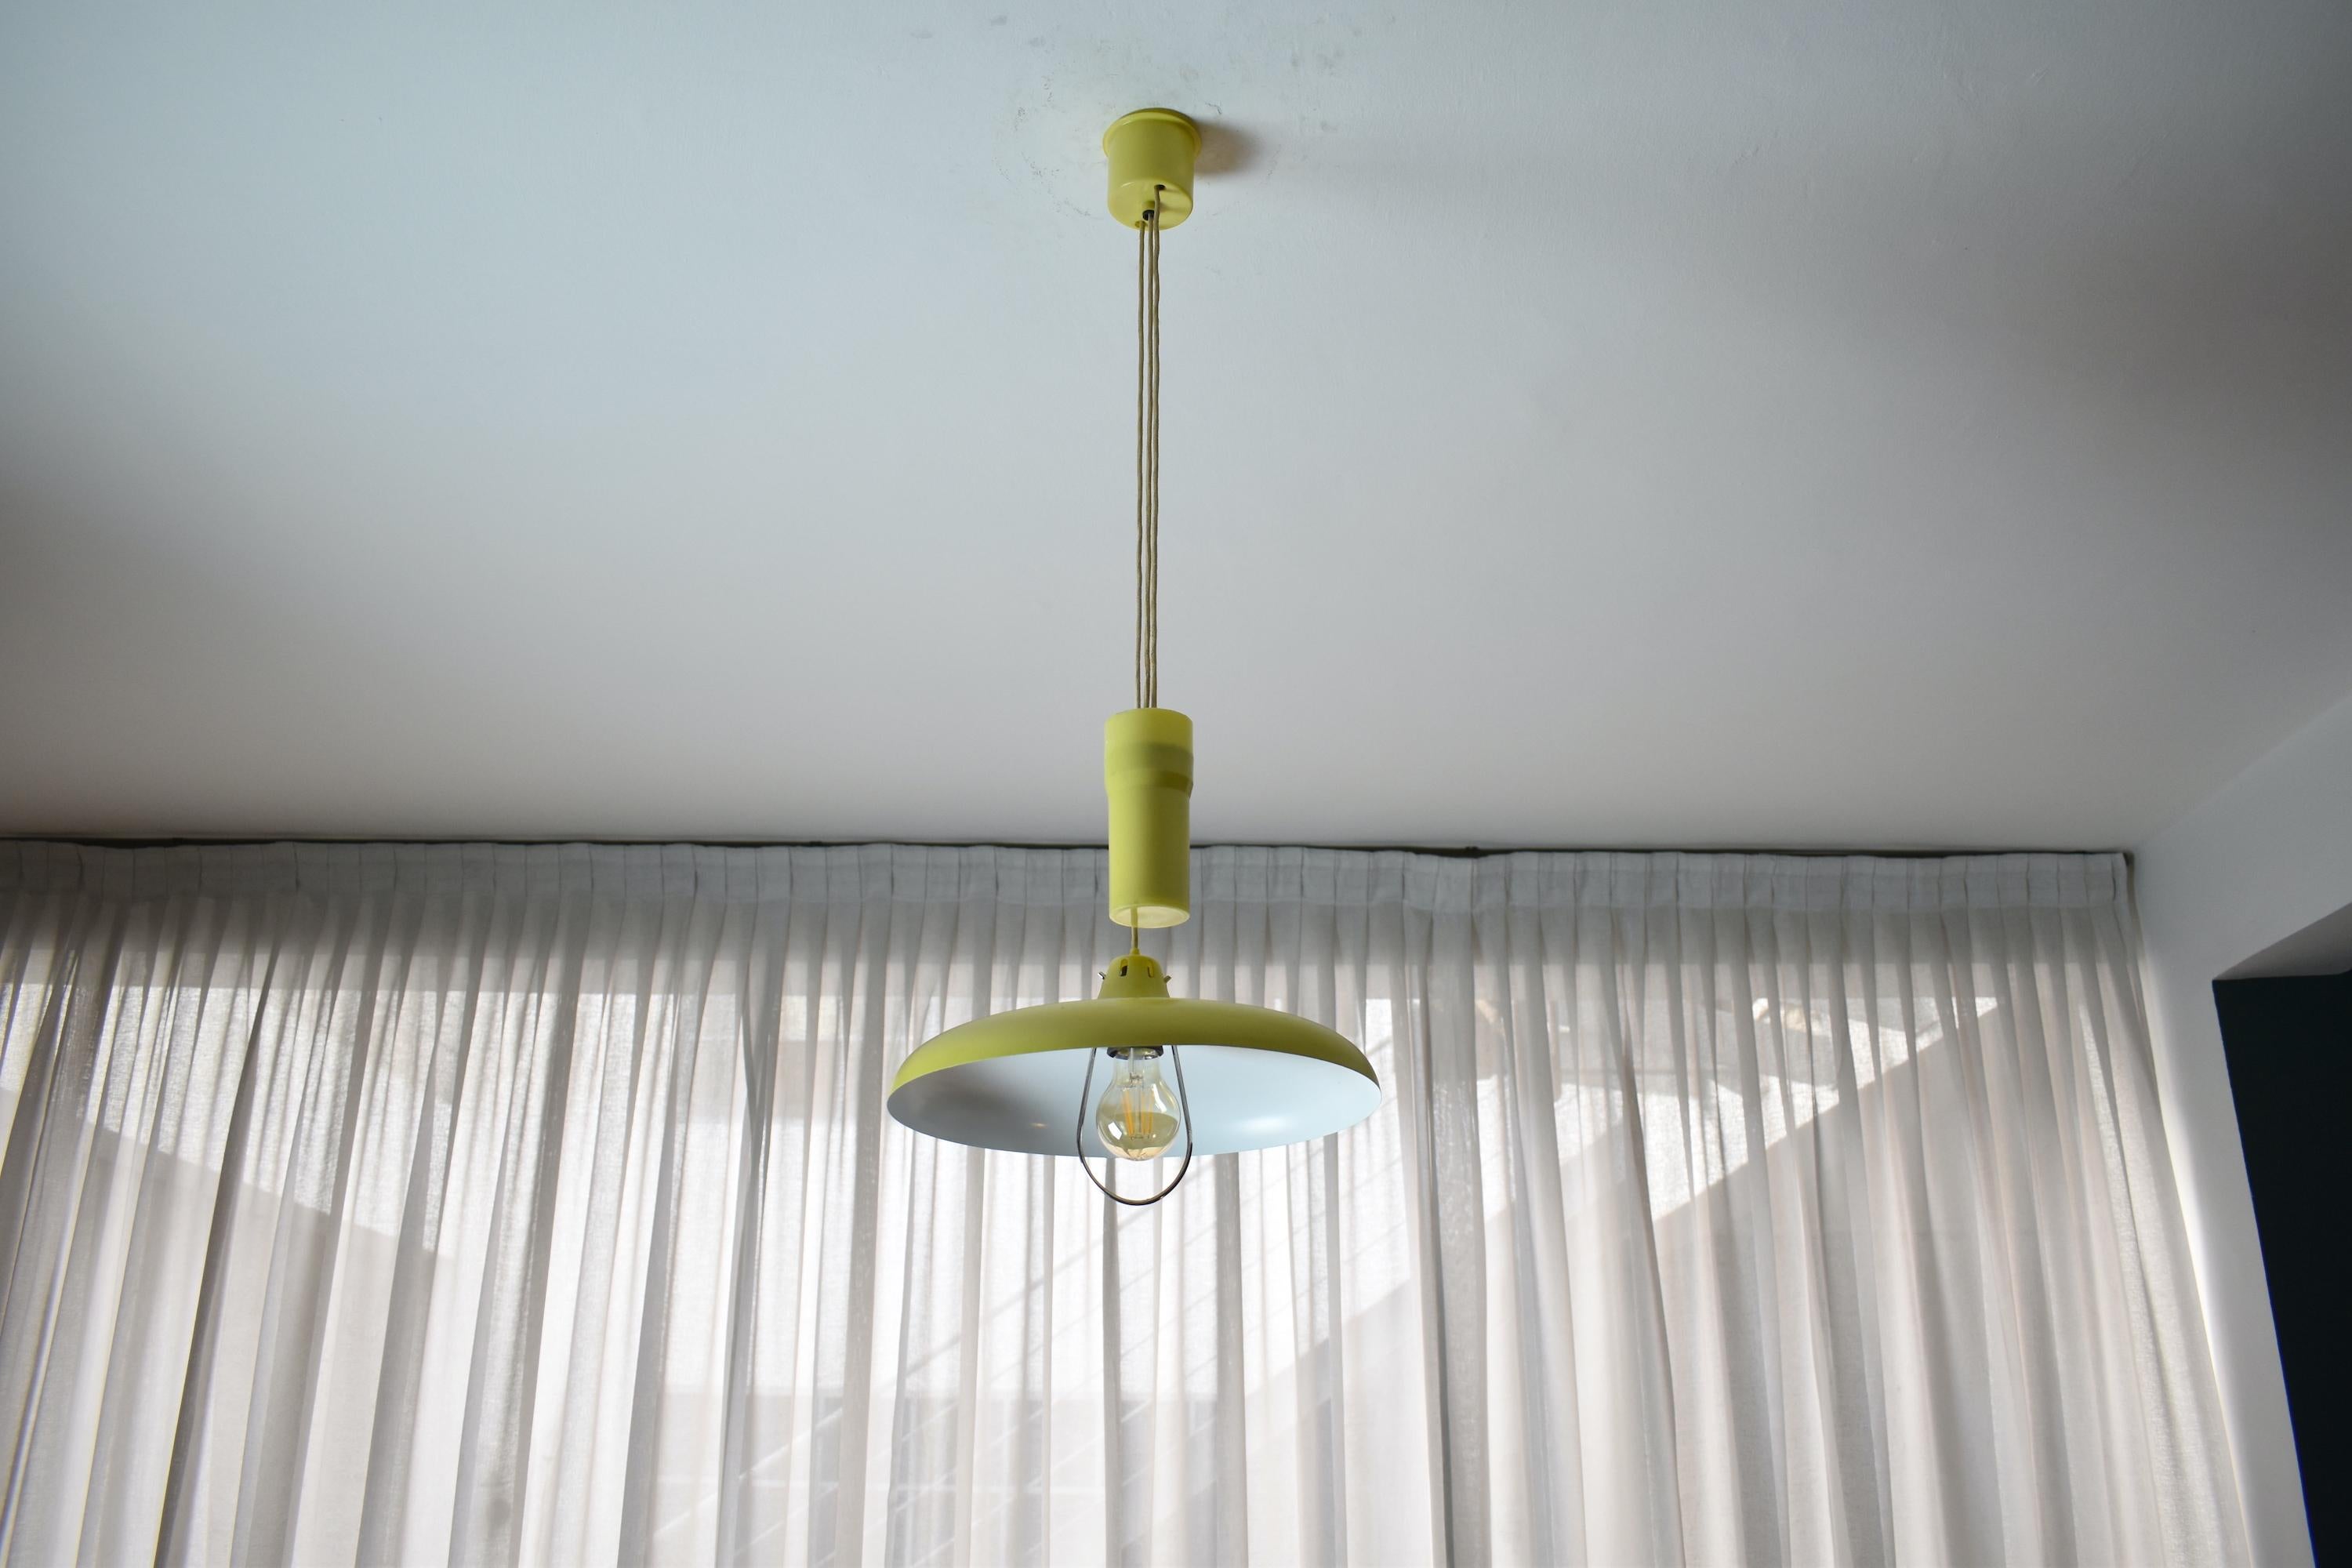 A fantastic 20th-century vintage pendant by collectible Italian manufacturer Stilux Milano which adjusts in weight via its counterweight design made of perspex. The light is brilliantly designed with a pulley under the shade. The apple green color